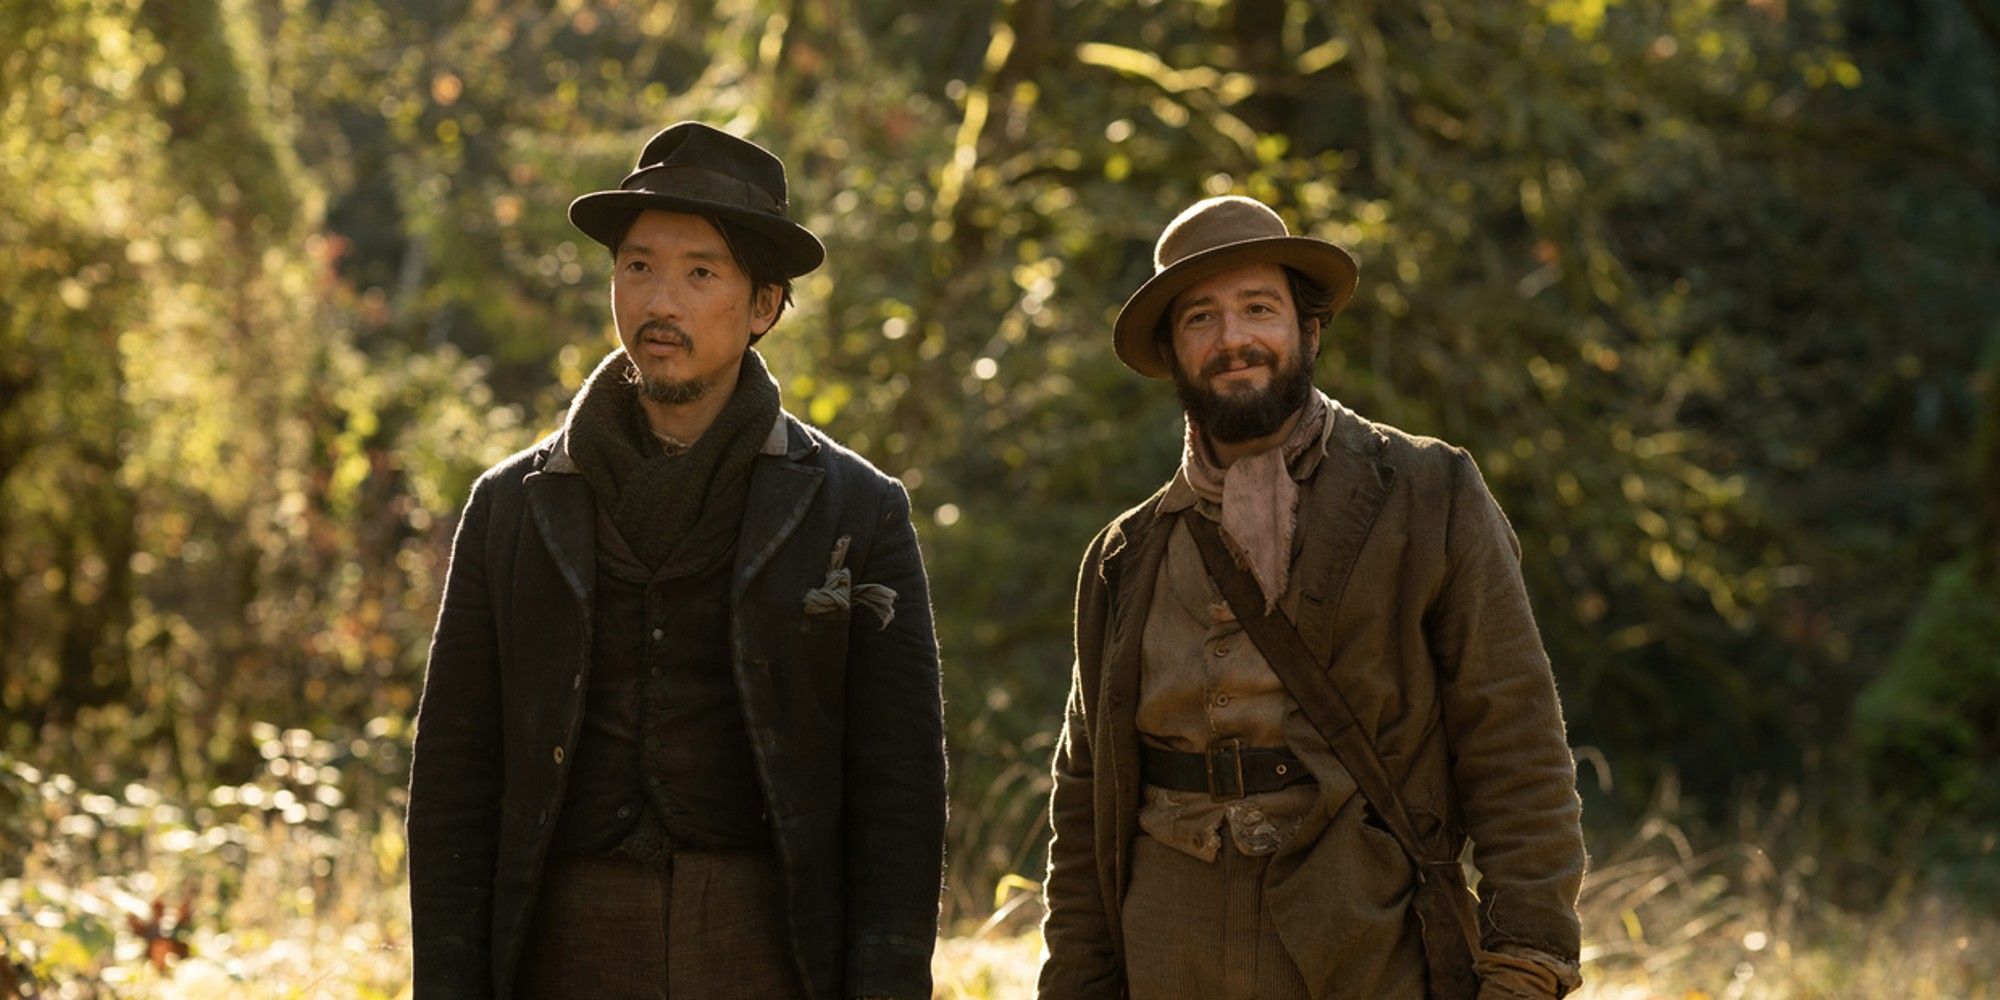 Orion Lee and John Magaro in 'First Cow' (2019)